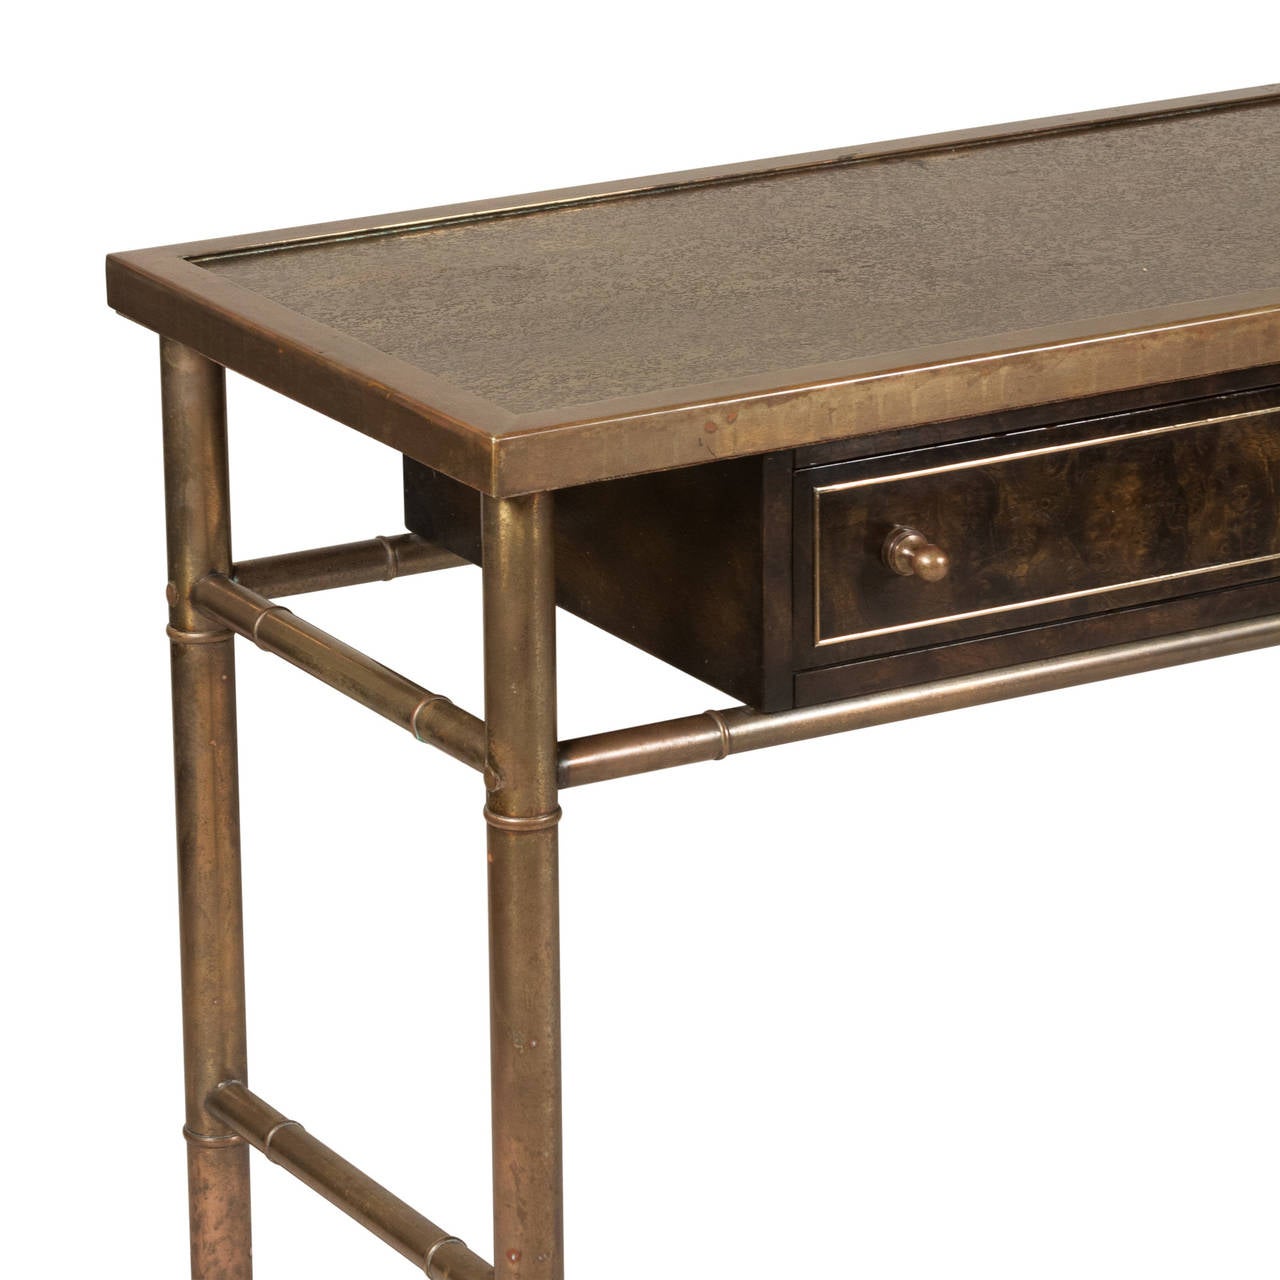 American Patinated Bronze Console Table by Mastercraft